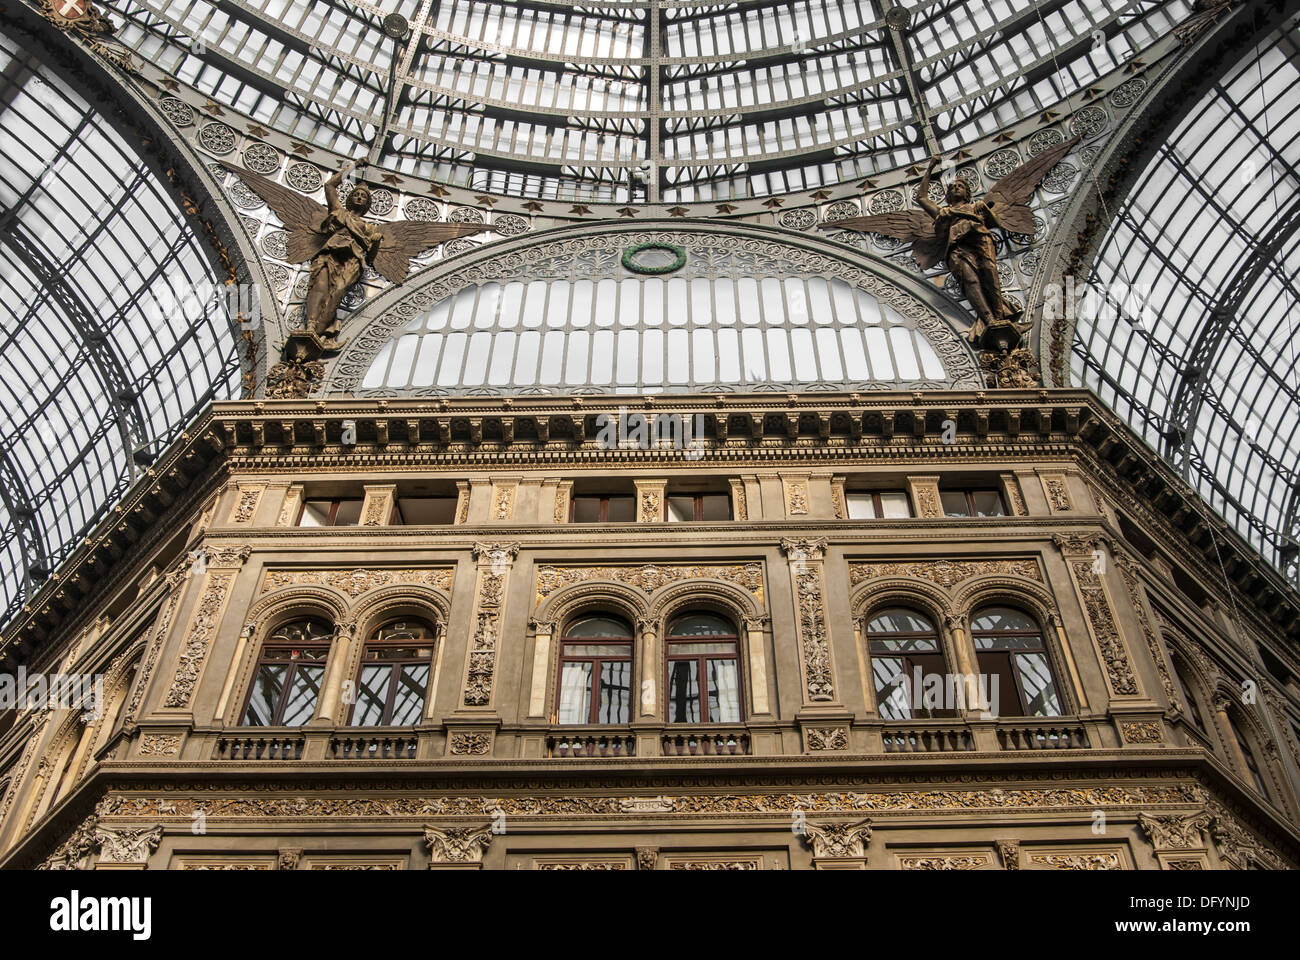 Detail of the glass roof of Galleria Umberto I, a 19th century public gallery in Naples, Italy Stock Photo